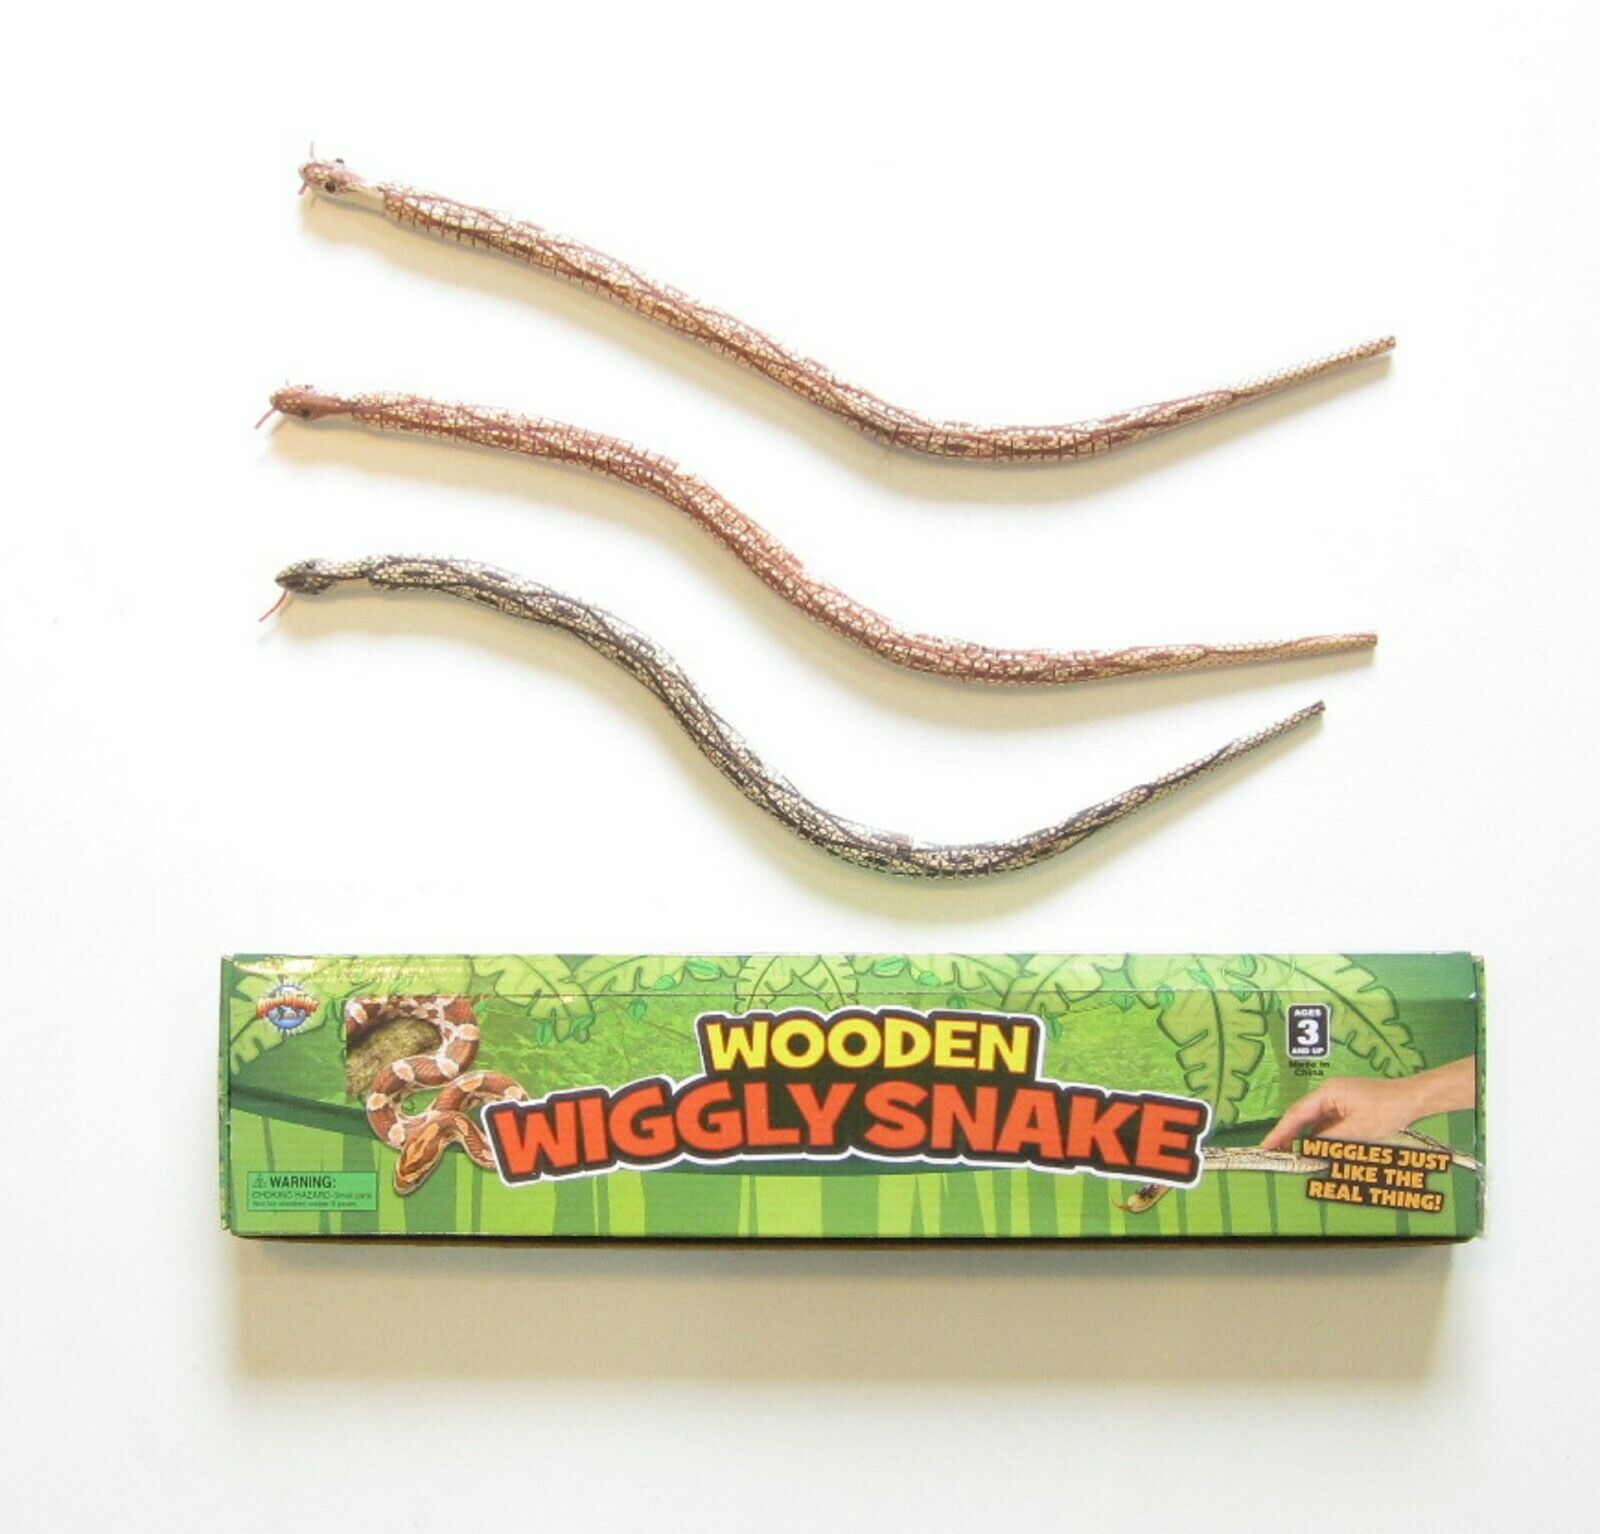 3 New Wooden Wiggle Snakes  Wood Snake Pretend Classic Toy 20" Size